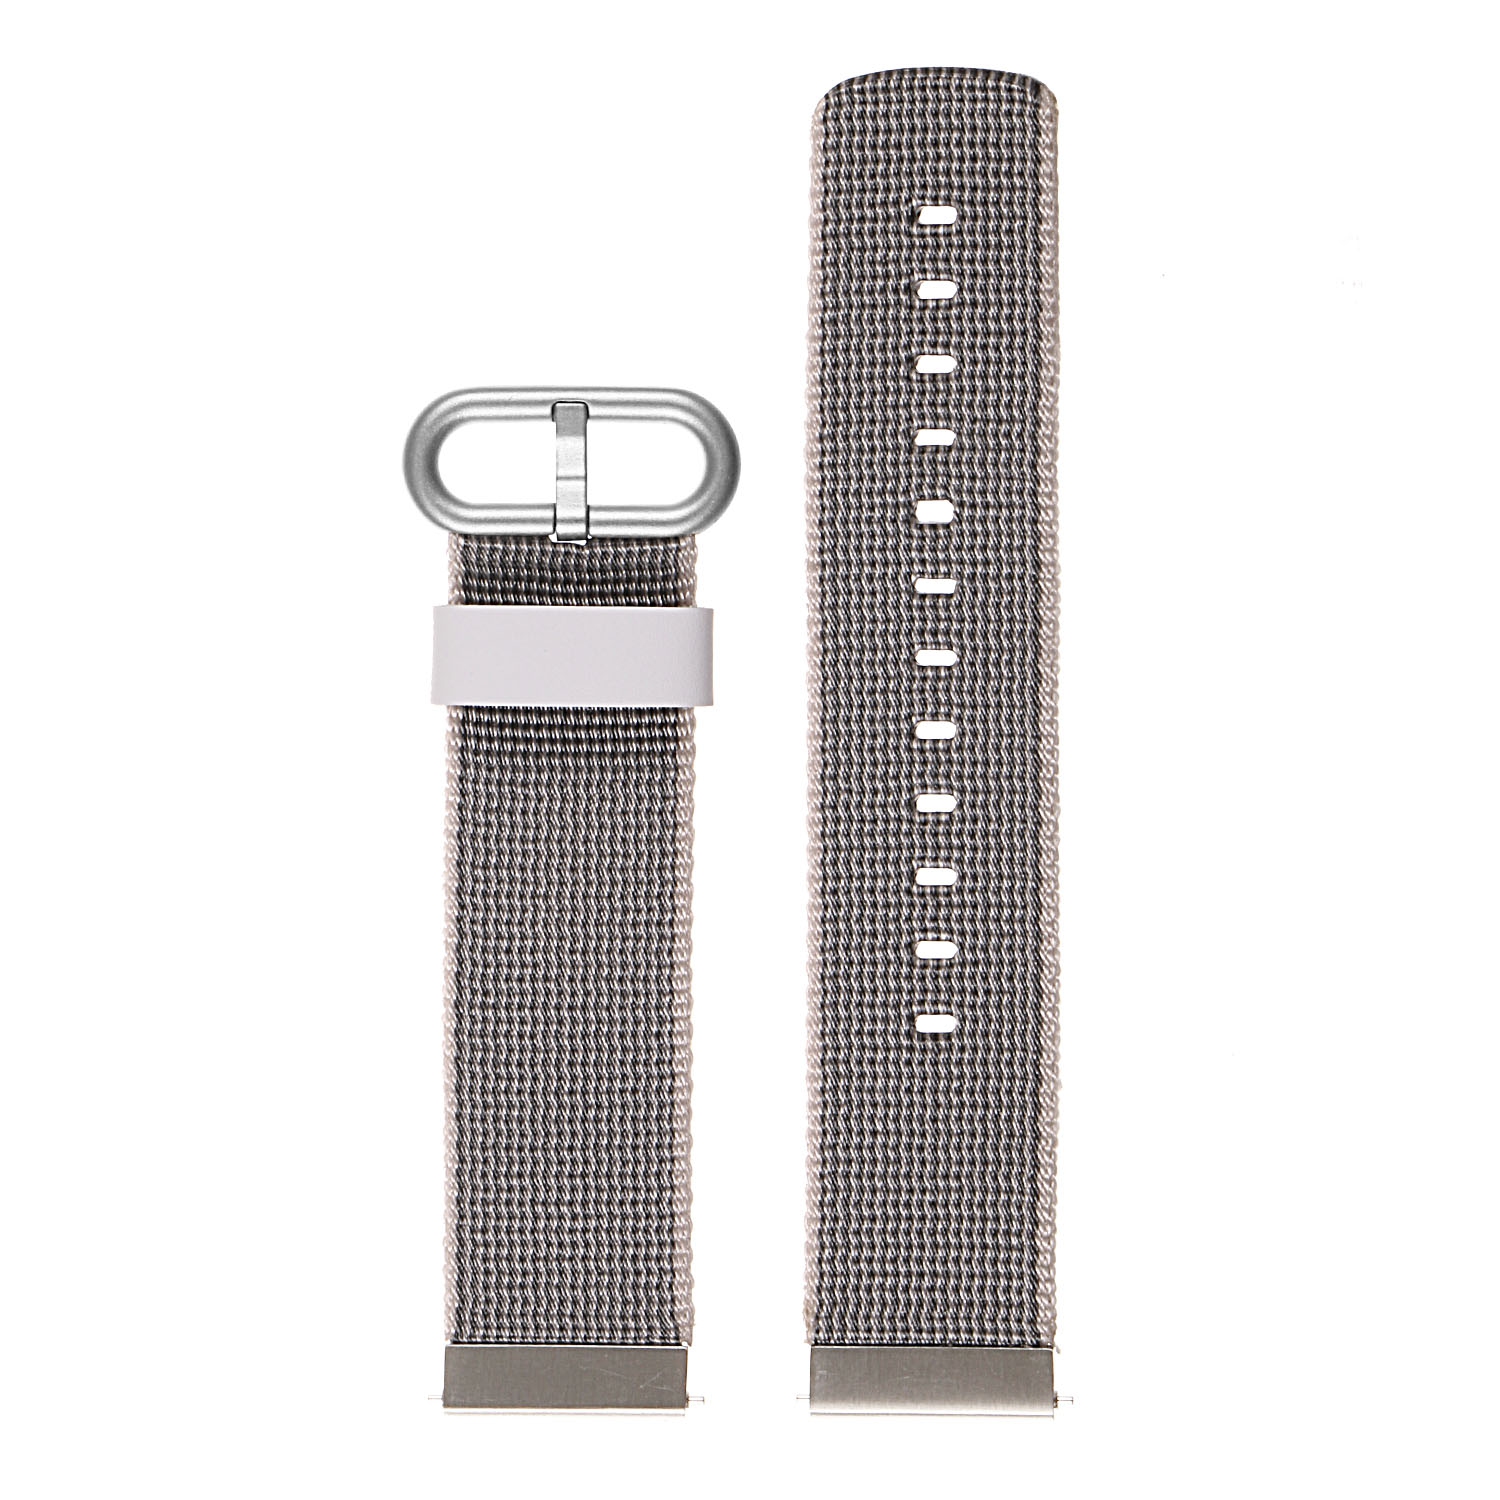 StrapsCo Ballistic Woven Nylon Replacement Watch Band Strap for Samsung Gear S3 Classic/Frontier - Grey